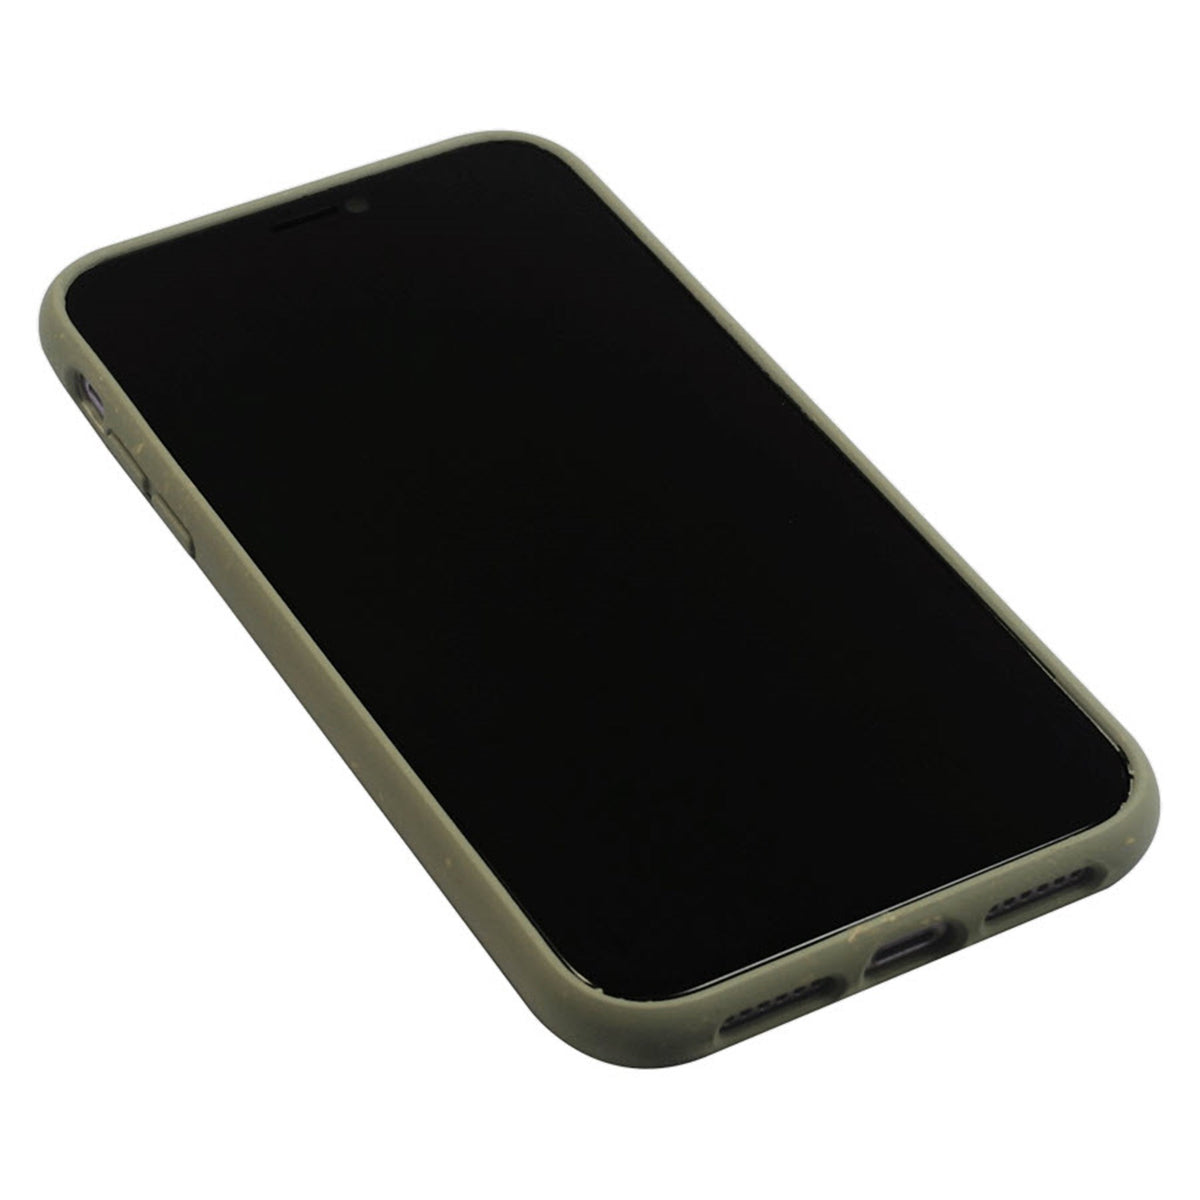 COIP67809-GreyLime-iPhone-6-7-8-SE-Biodegradable-Cover-Green_05.jpg